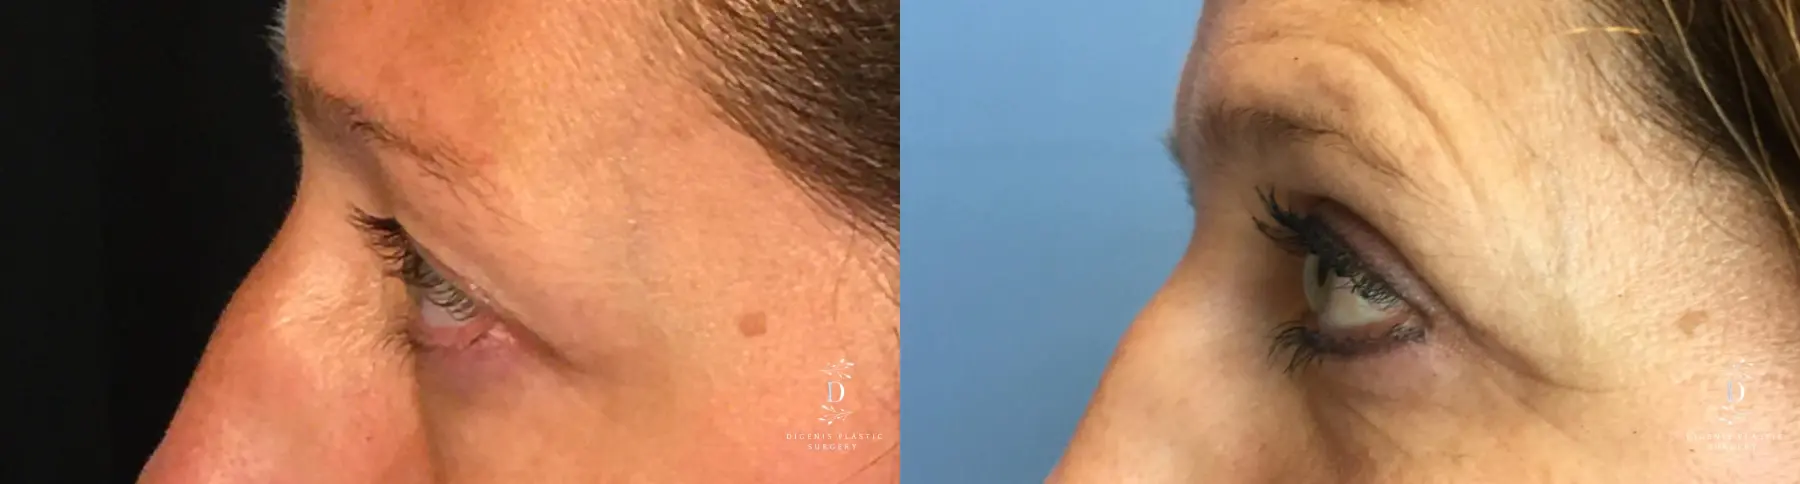 Eyelid Surgery: Patient 17 - Before and After 5